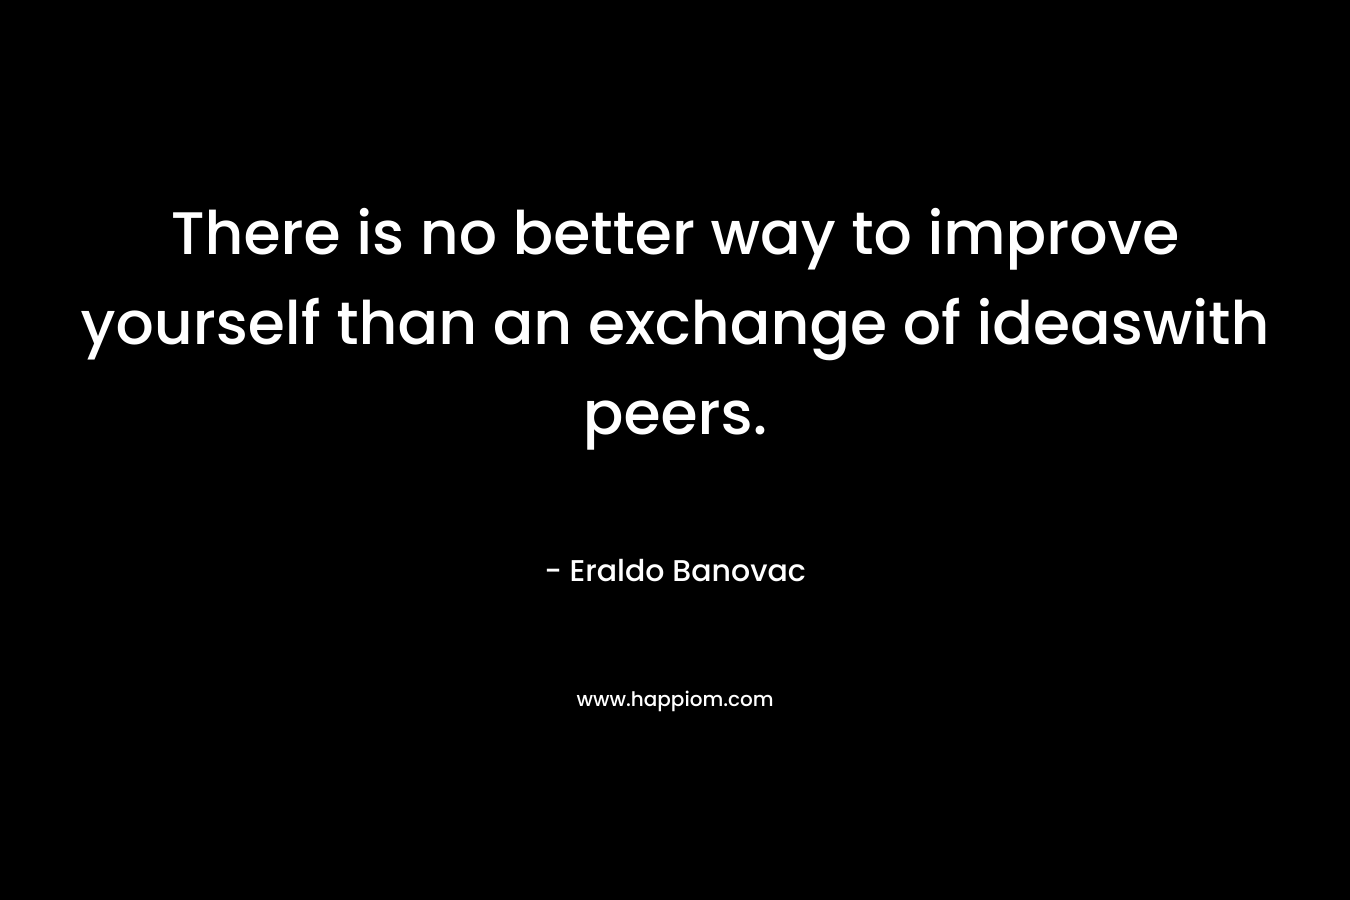 There is no better way to improve yourself than an exchange of ideaswith peers. – Eraldo Banovac